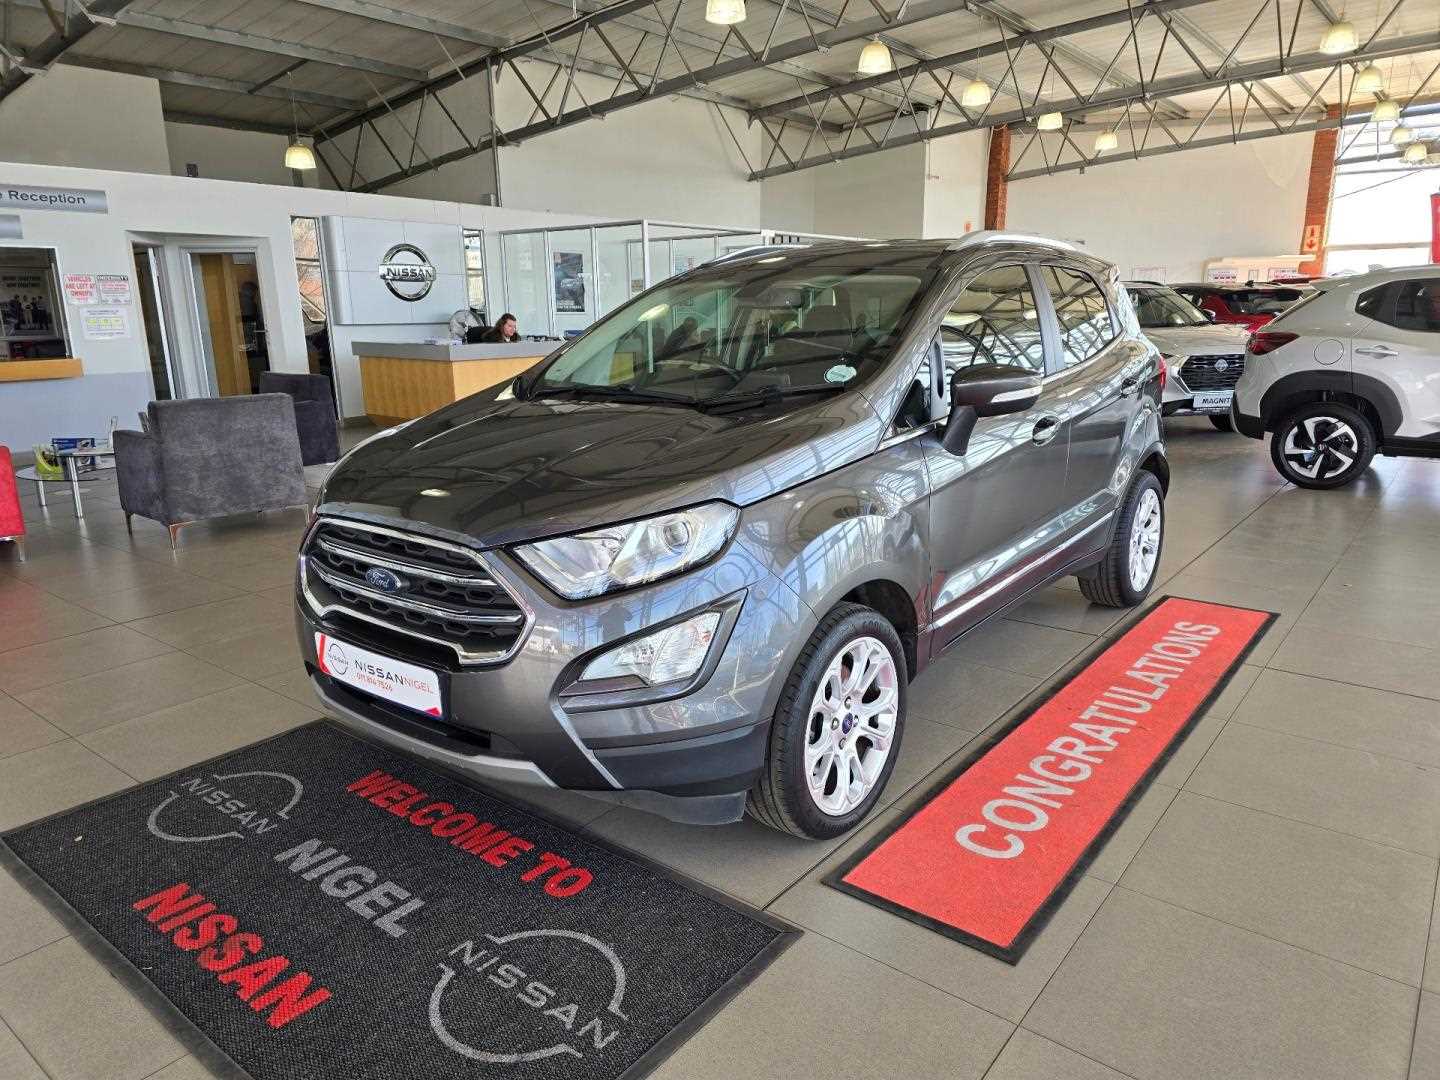 FORD ECOSPORT 1.0 ECOBOOST TITANIUM A/T for Sale in South Africa